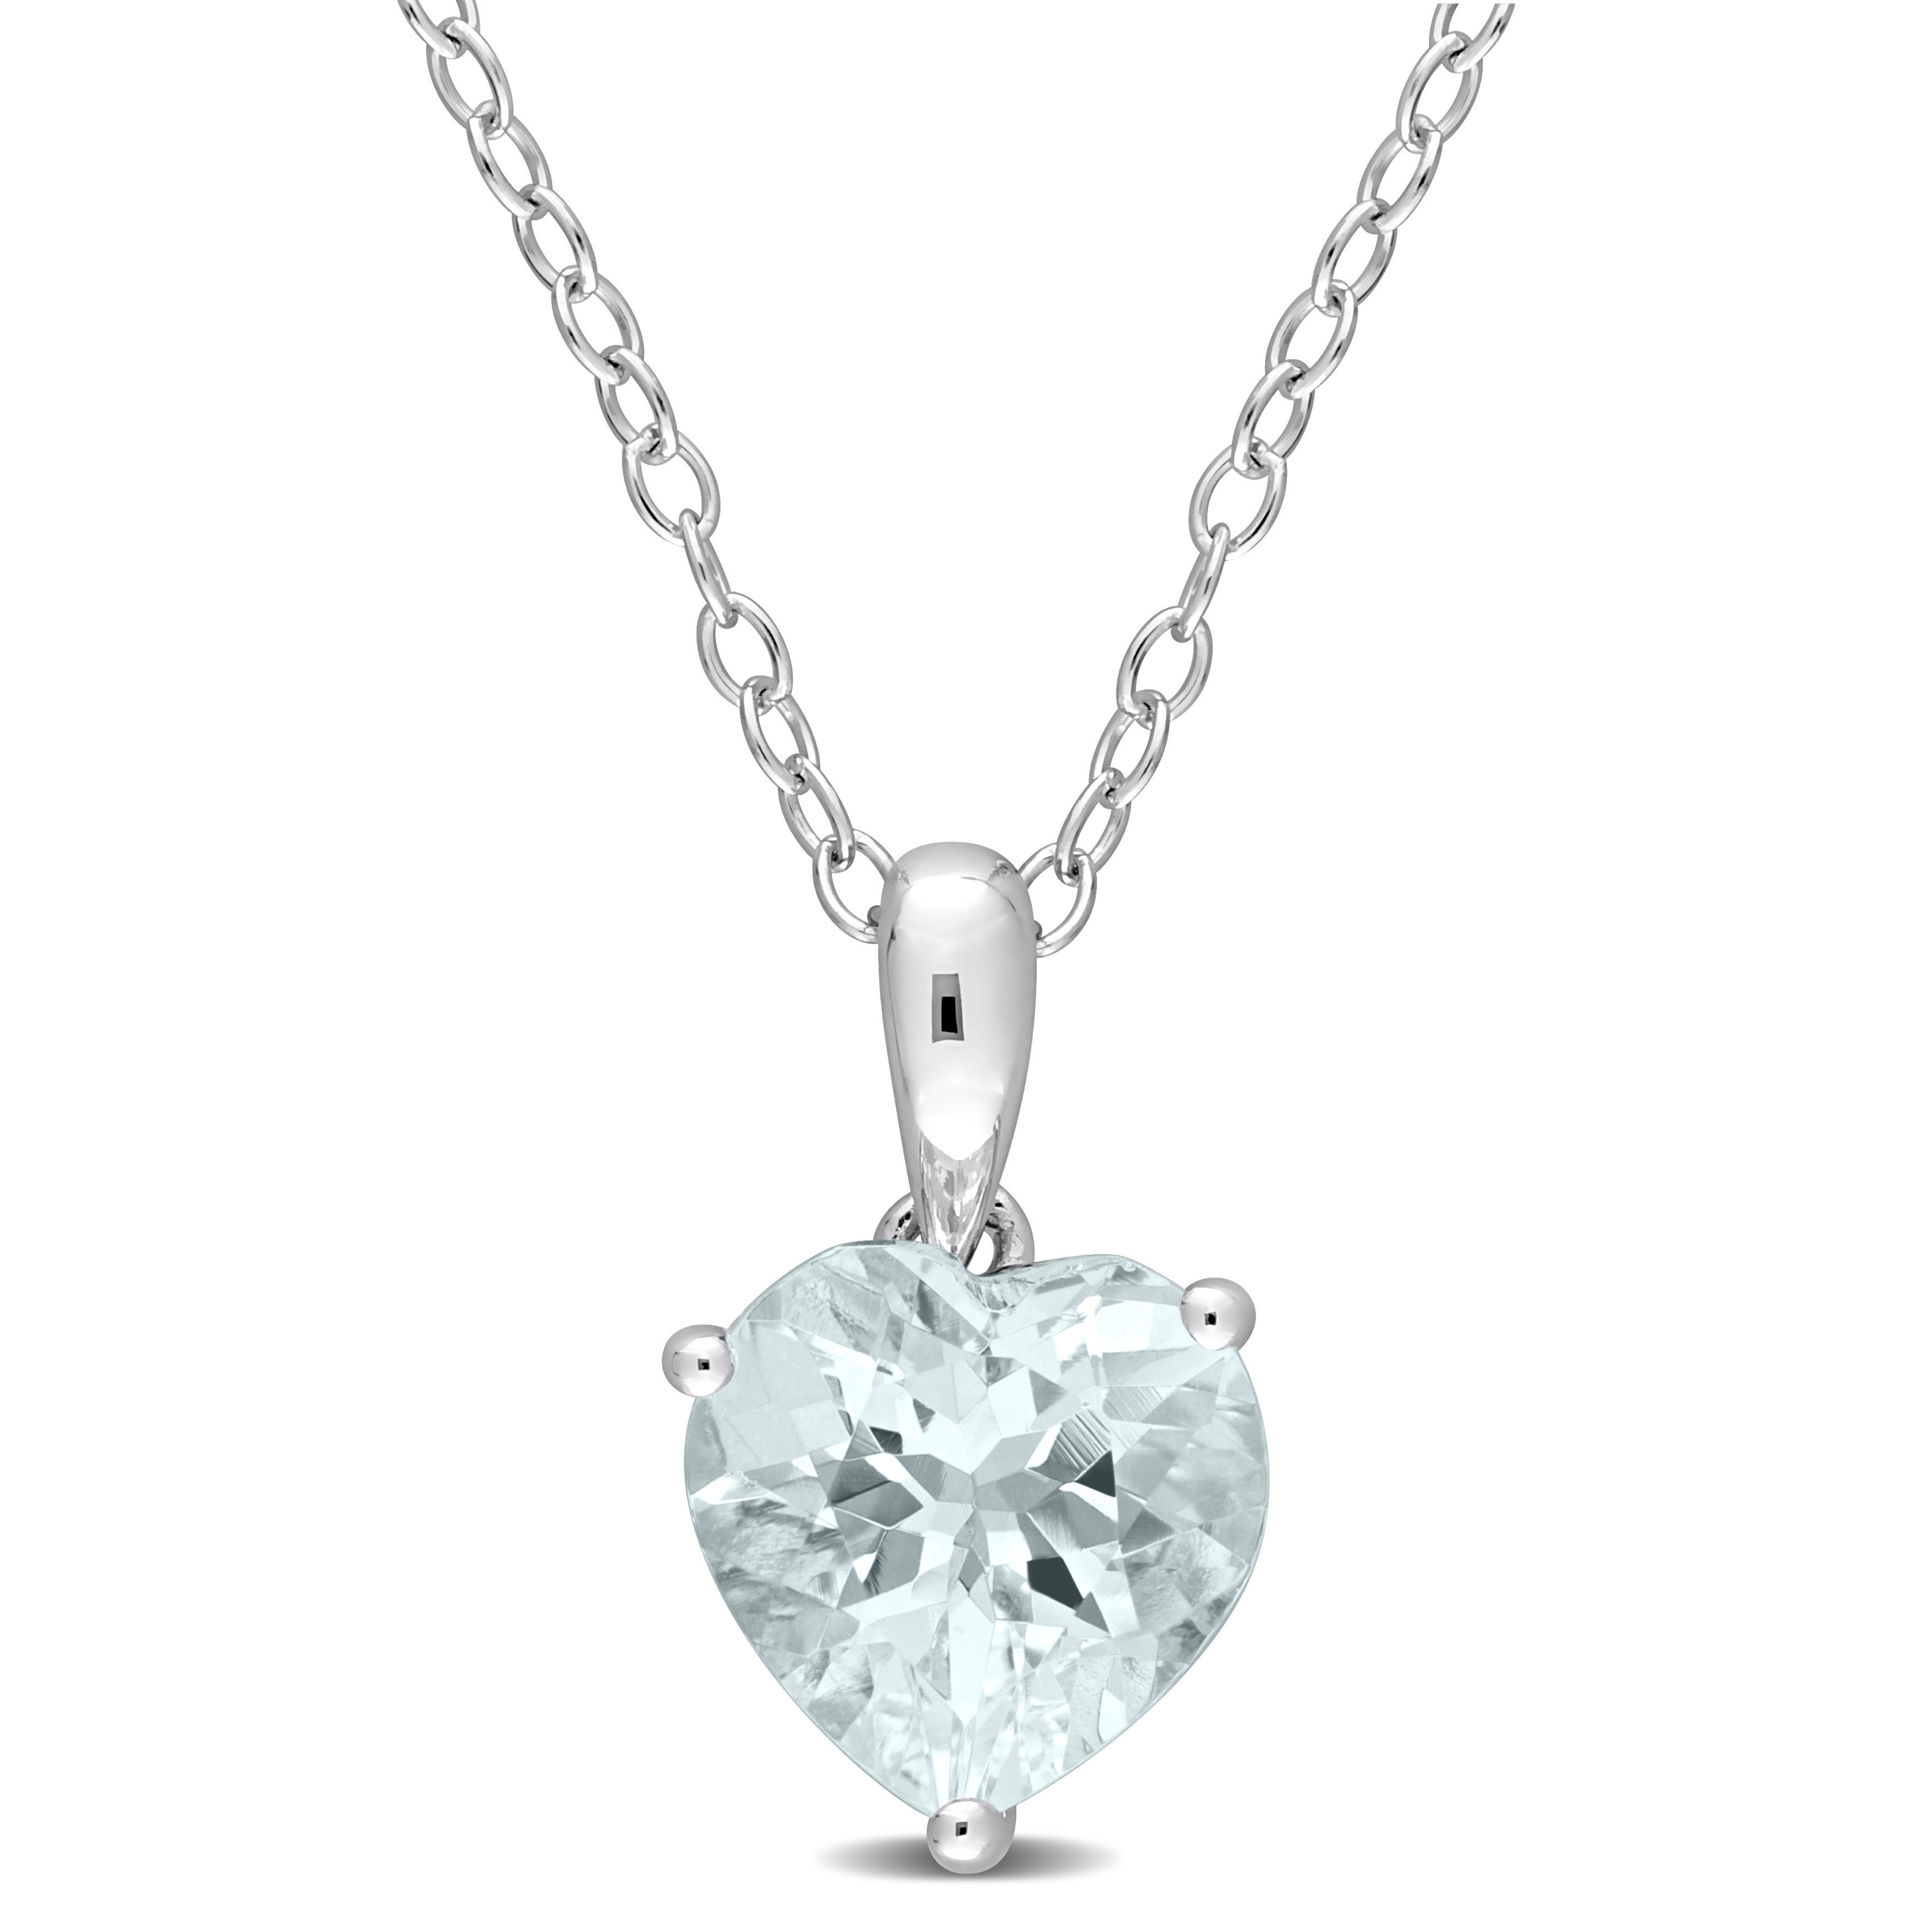 1 1/2 CT TGW Heart Shape Aquamarine Solitaire Heart Design Pendant with Chain in Sterling Silver - 18 in.